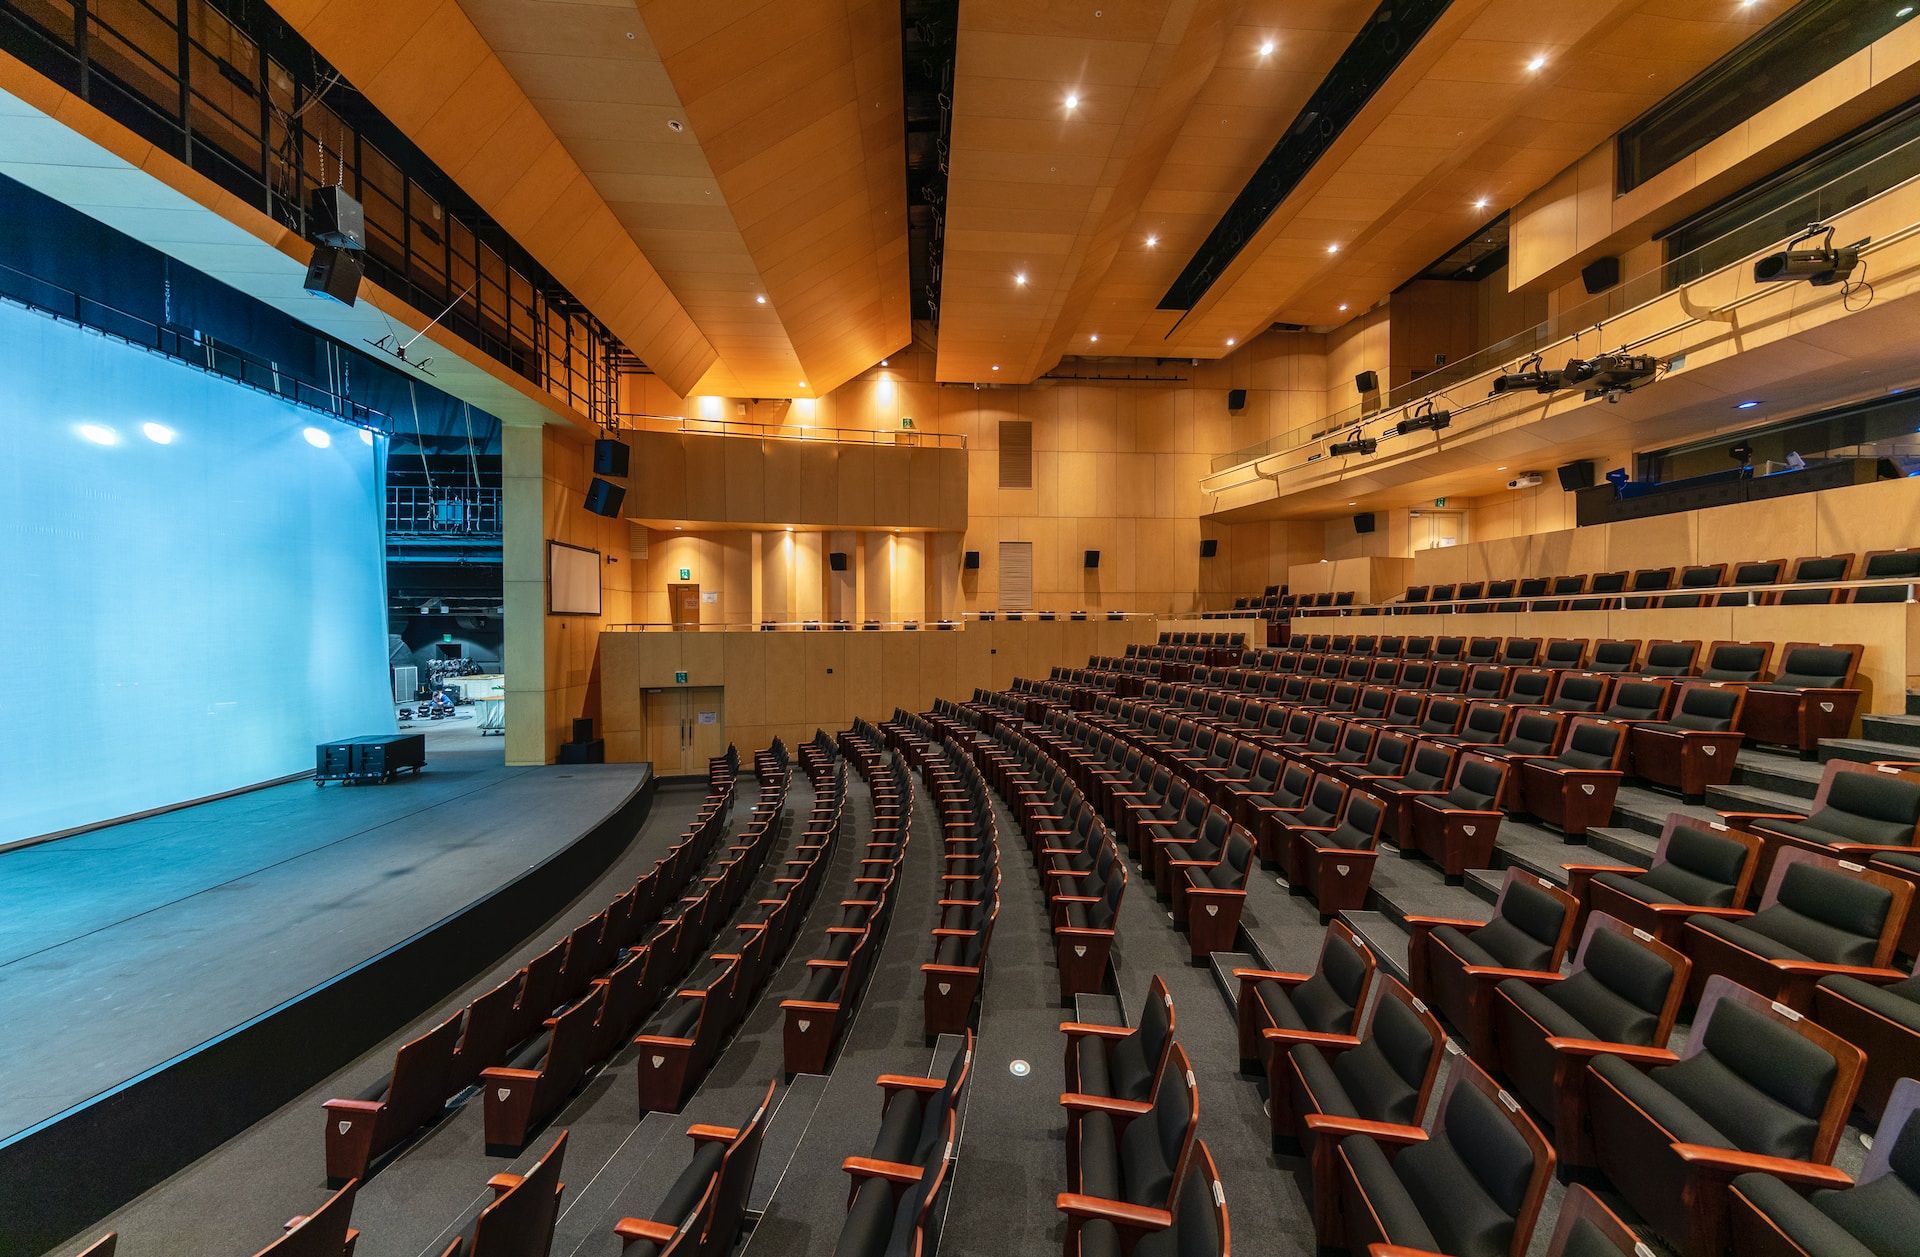 An auditorium facing a stage